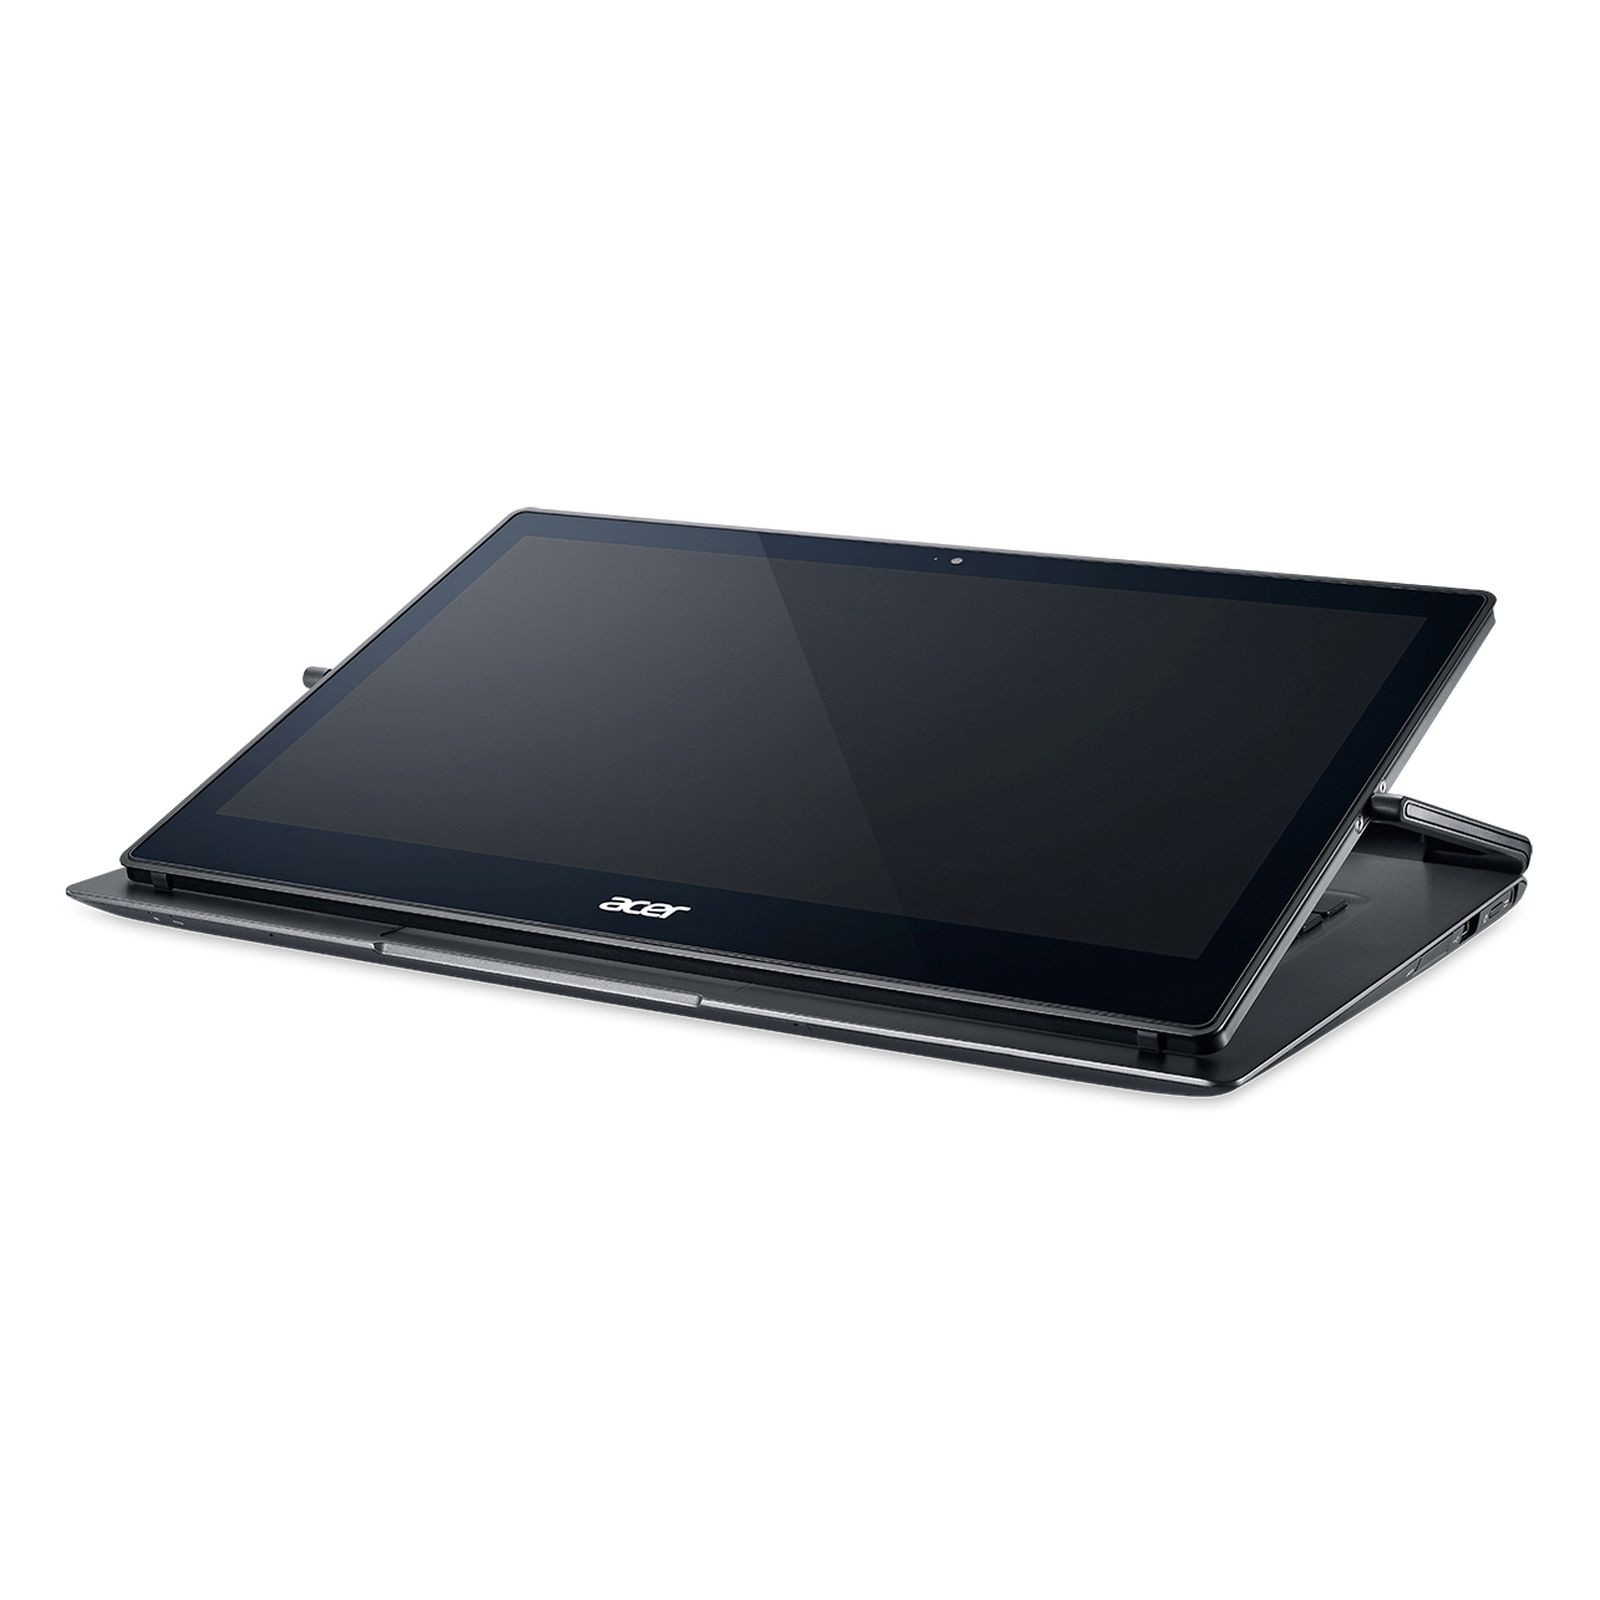 Acer aspire 5052 driver for macbook pro